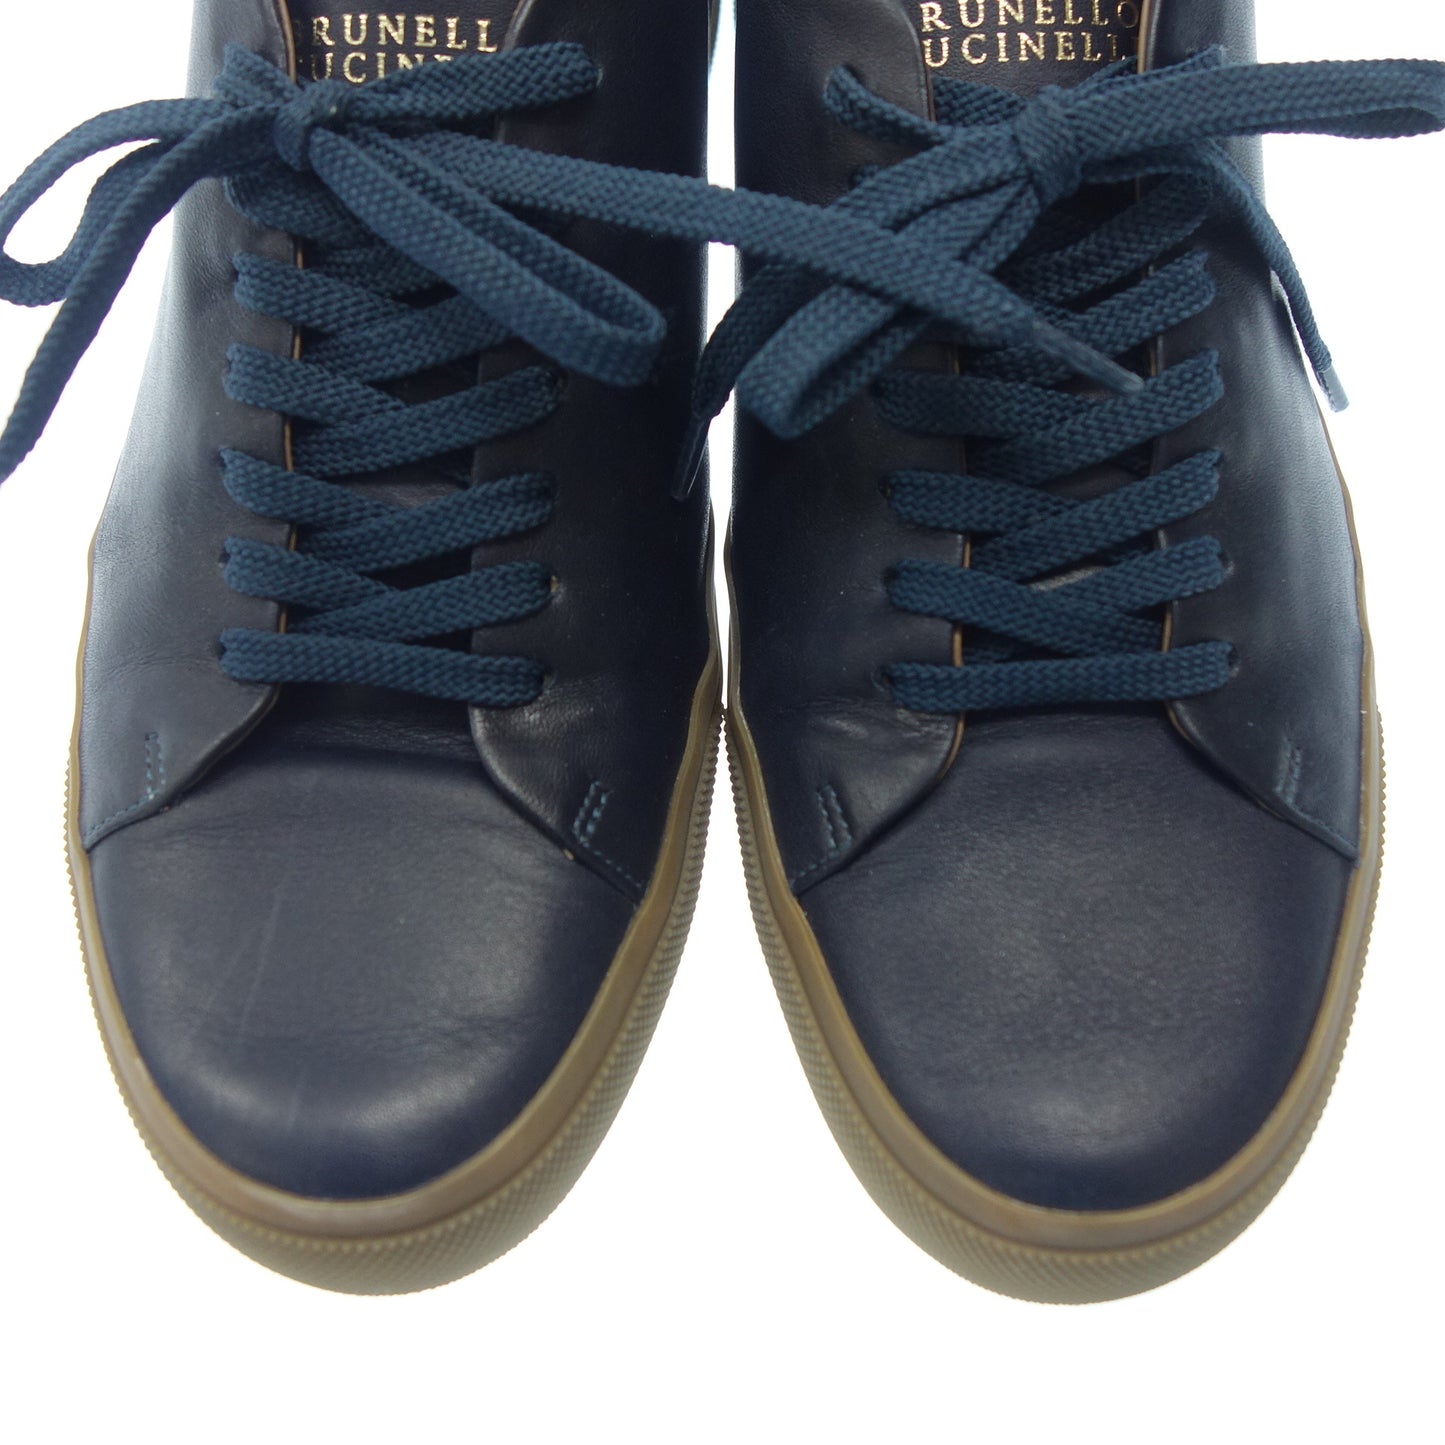 Brunello Cucinelli lace-up leather sneakers men's navy 41 BRUNELLO CUCINELLI [AFC35] [Used] 